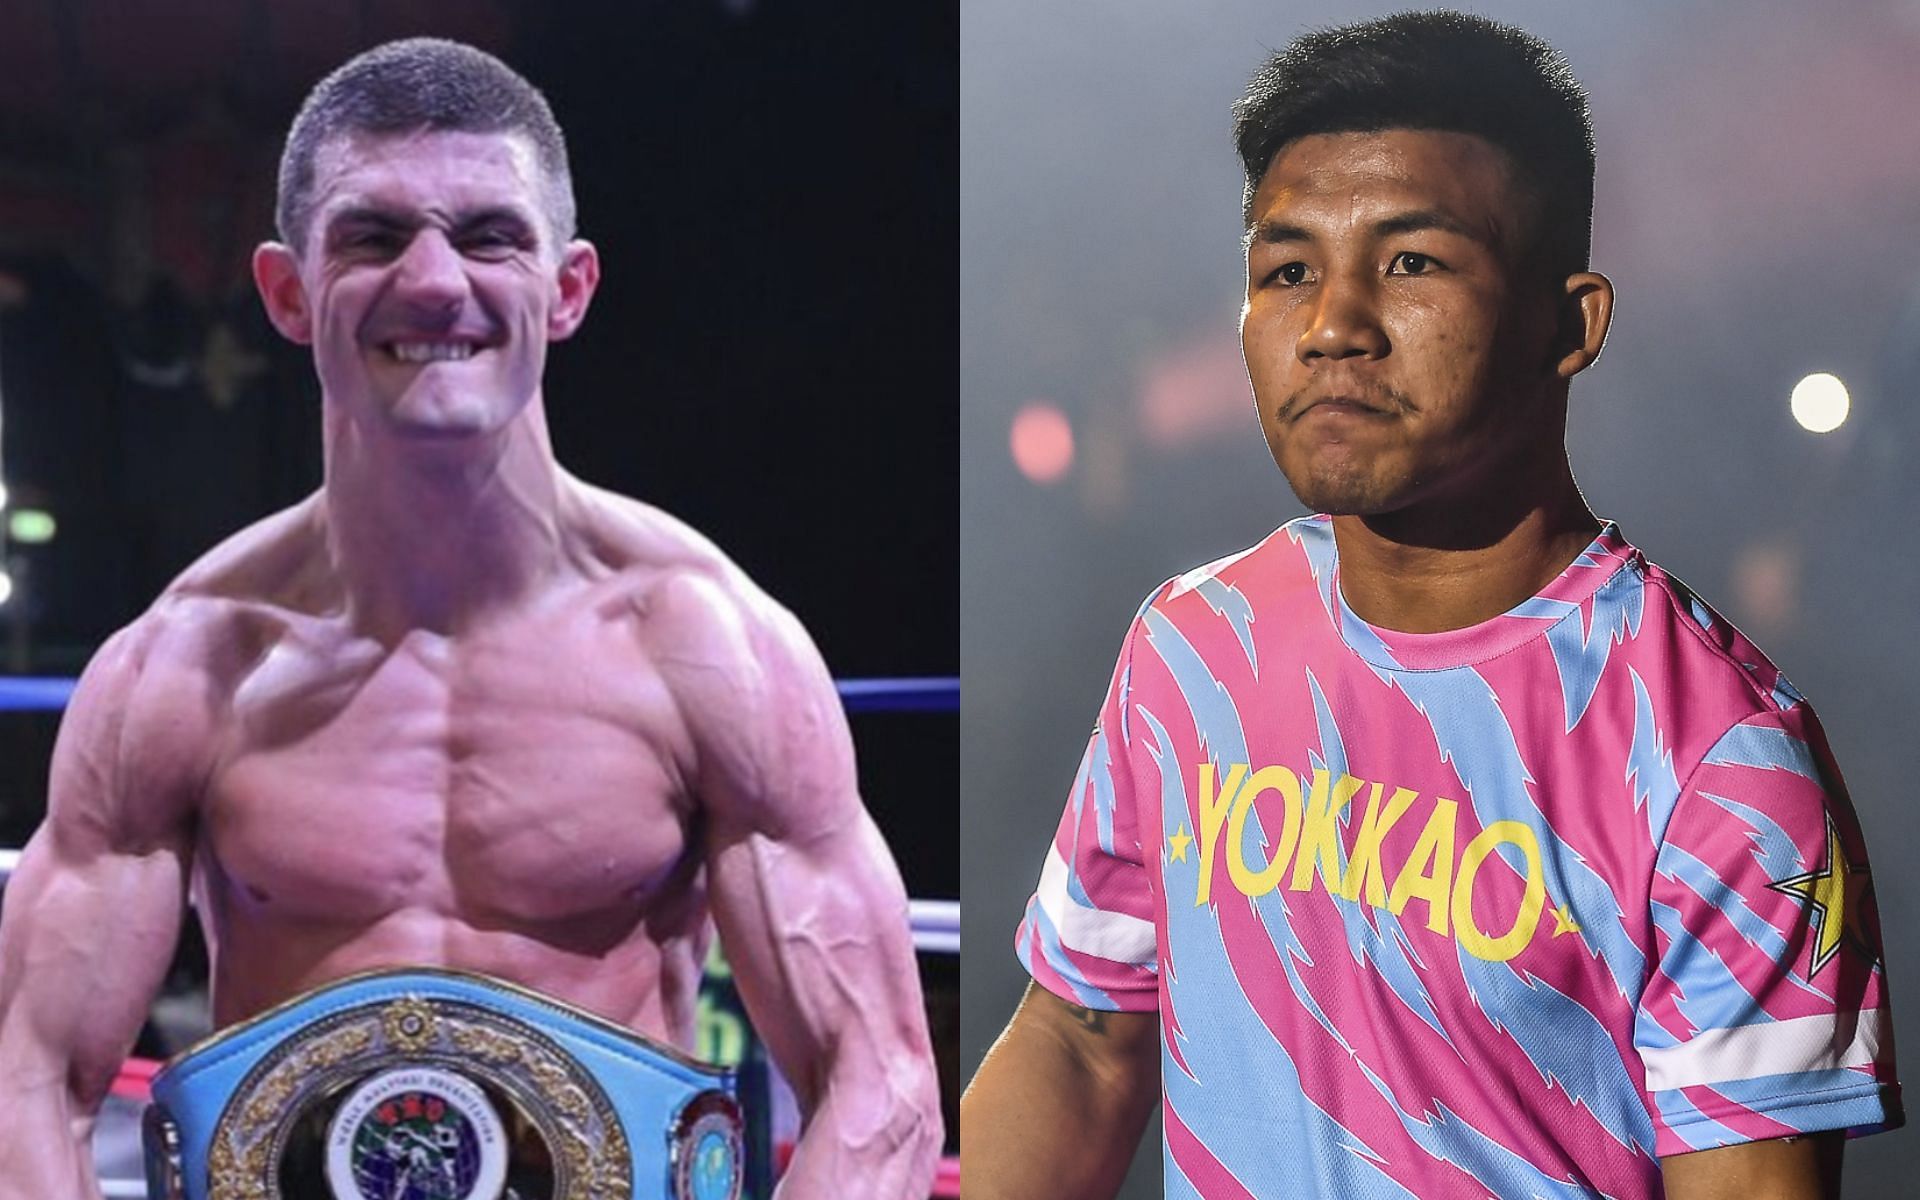 Rodtang Jitmuangnon (right) is ready to risk it all against Jacob Smith (left) at ONE 157. [Photos Jacob Smith Instagram, Rodtang Jitmuangnon]